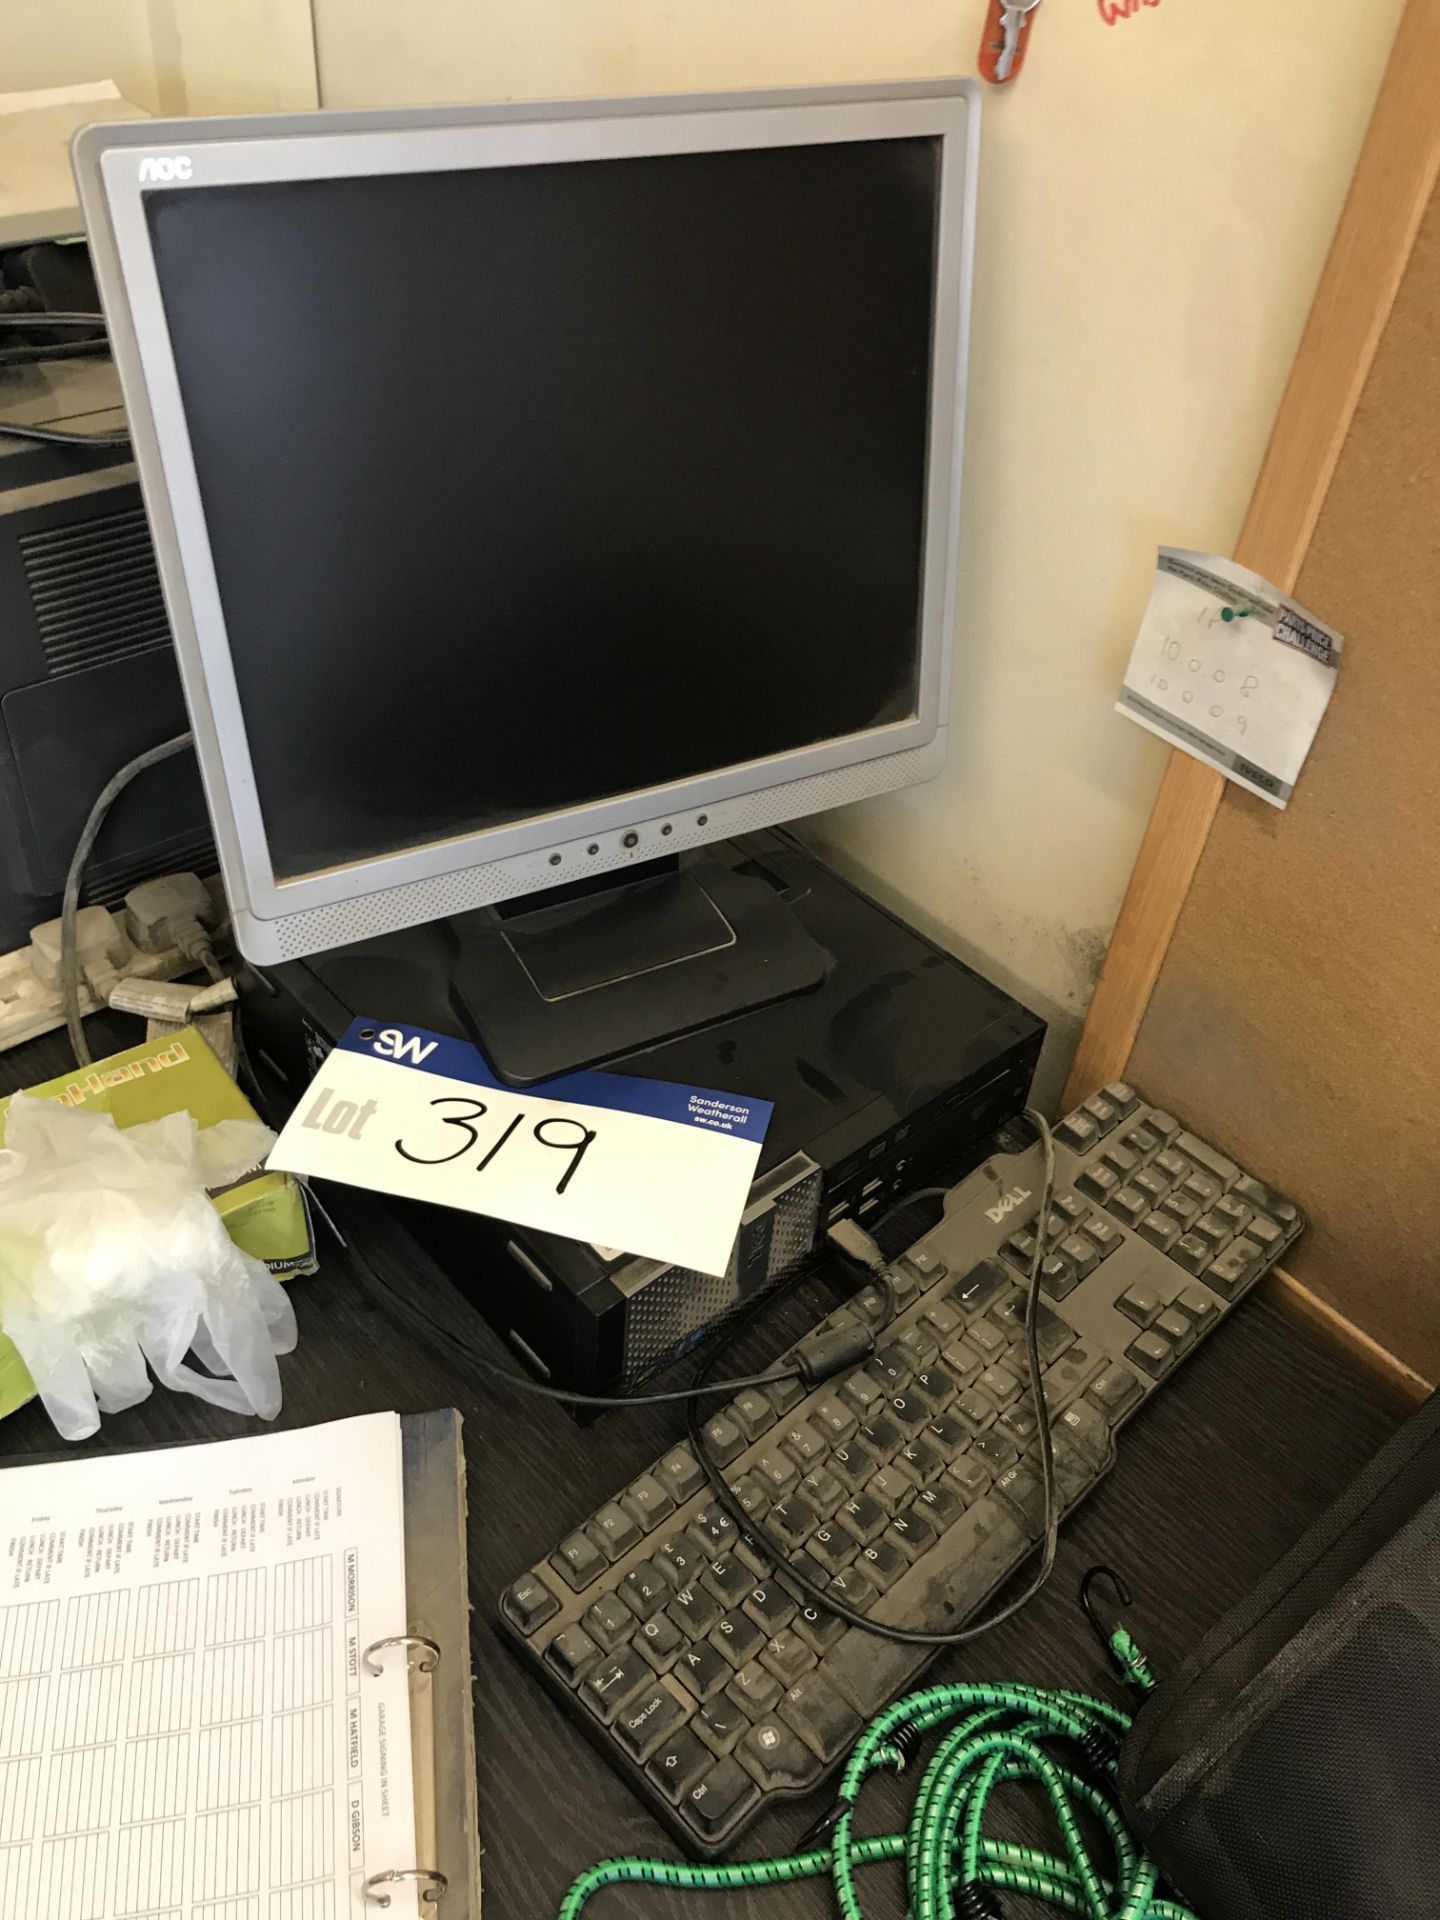 Dell Optiplex 790 Intel Core i5 Personal Computer, with monitor and keyboard (hard disk removed) (